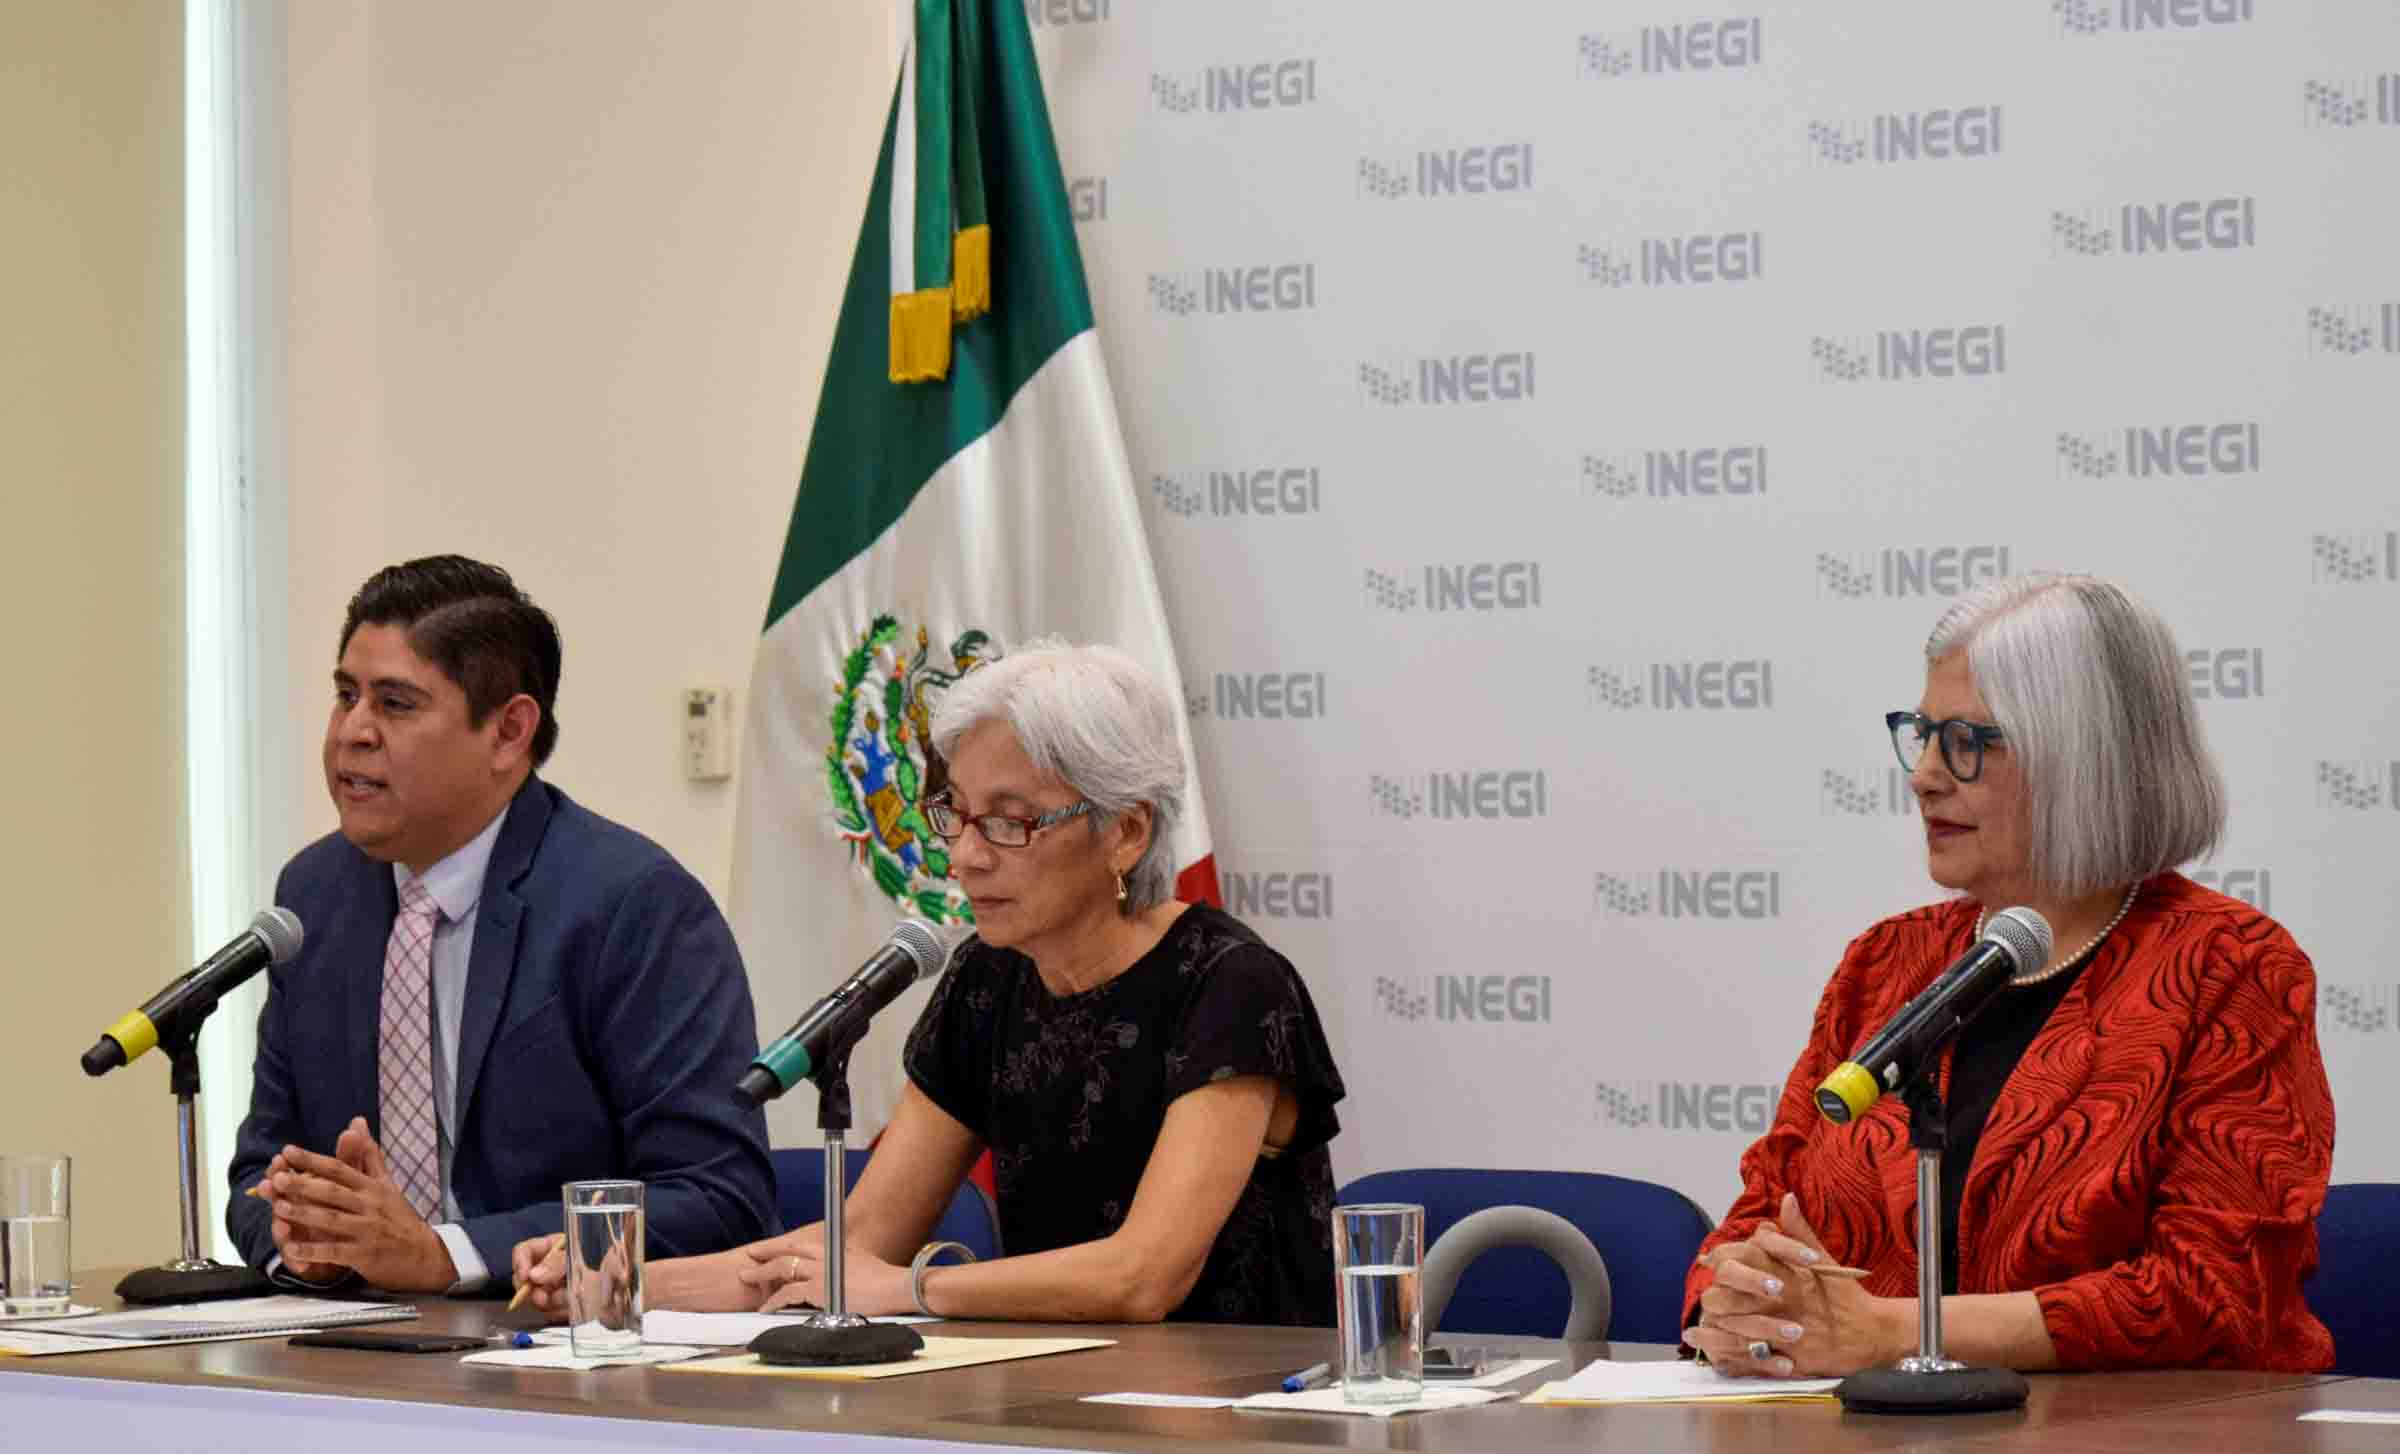 three researchers seated at table with microphones in front of Mexican flag